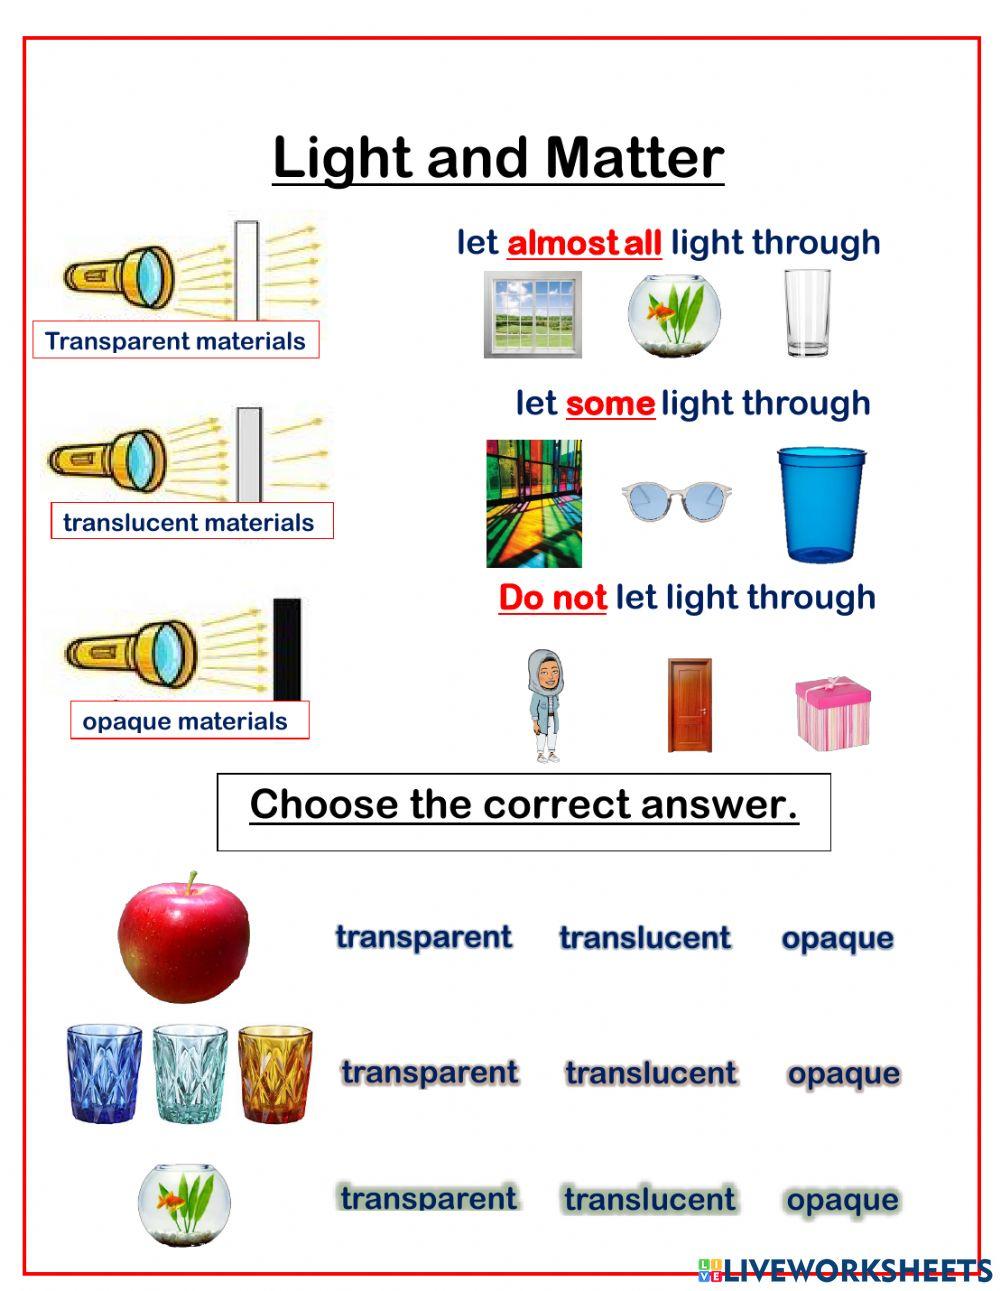 Light and Matter- Flipped Learning Lesson